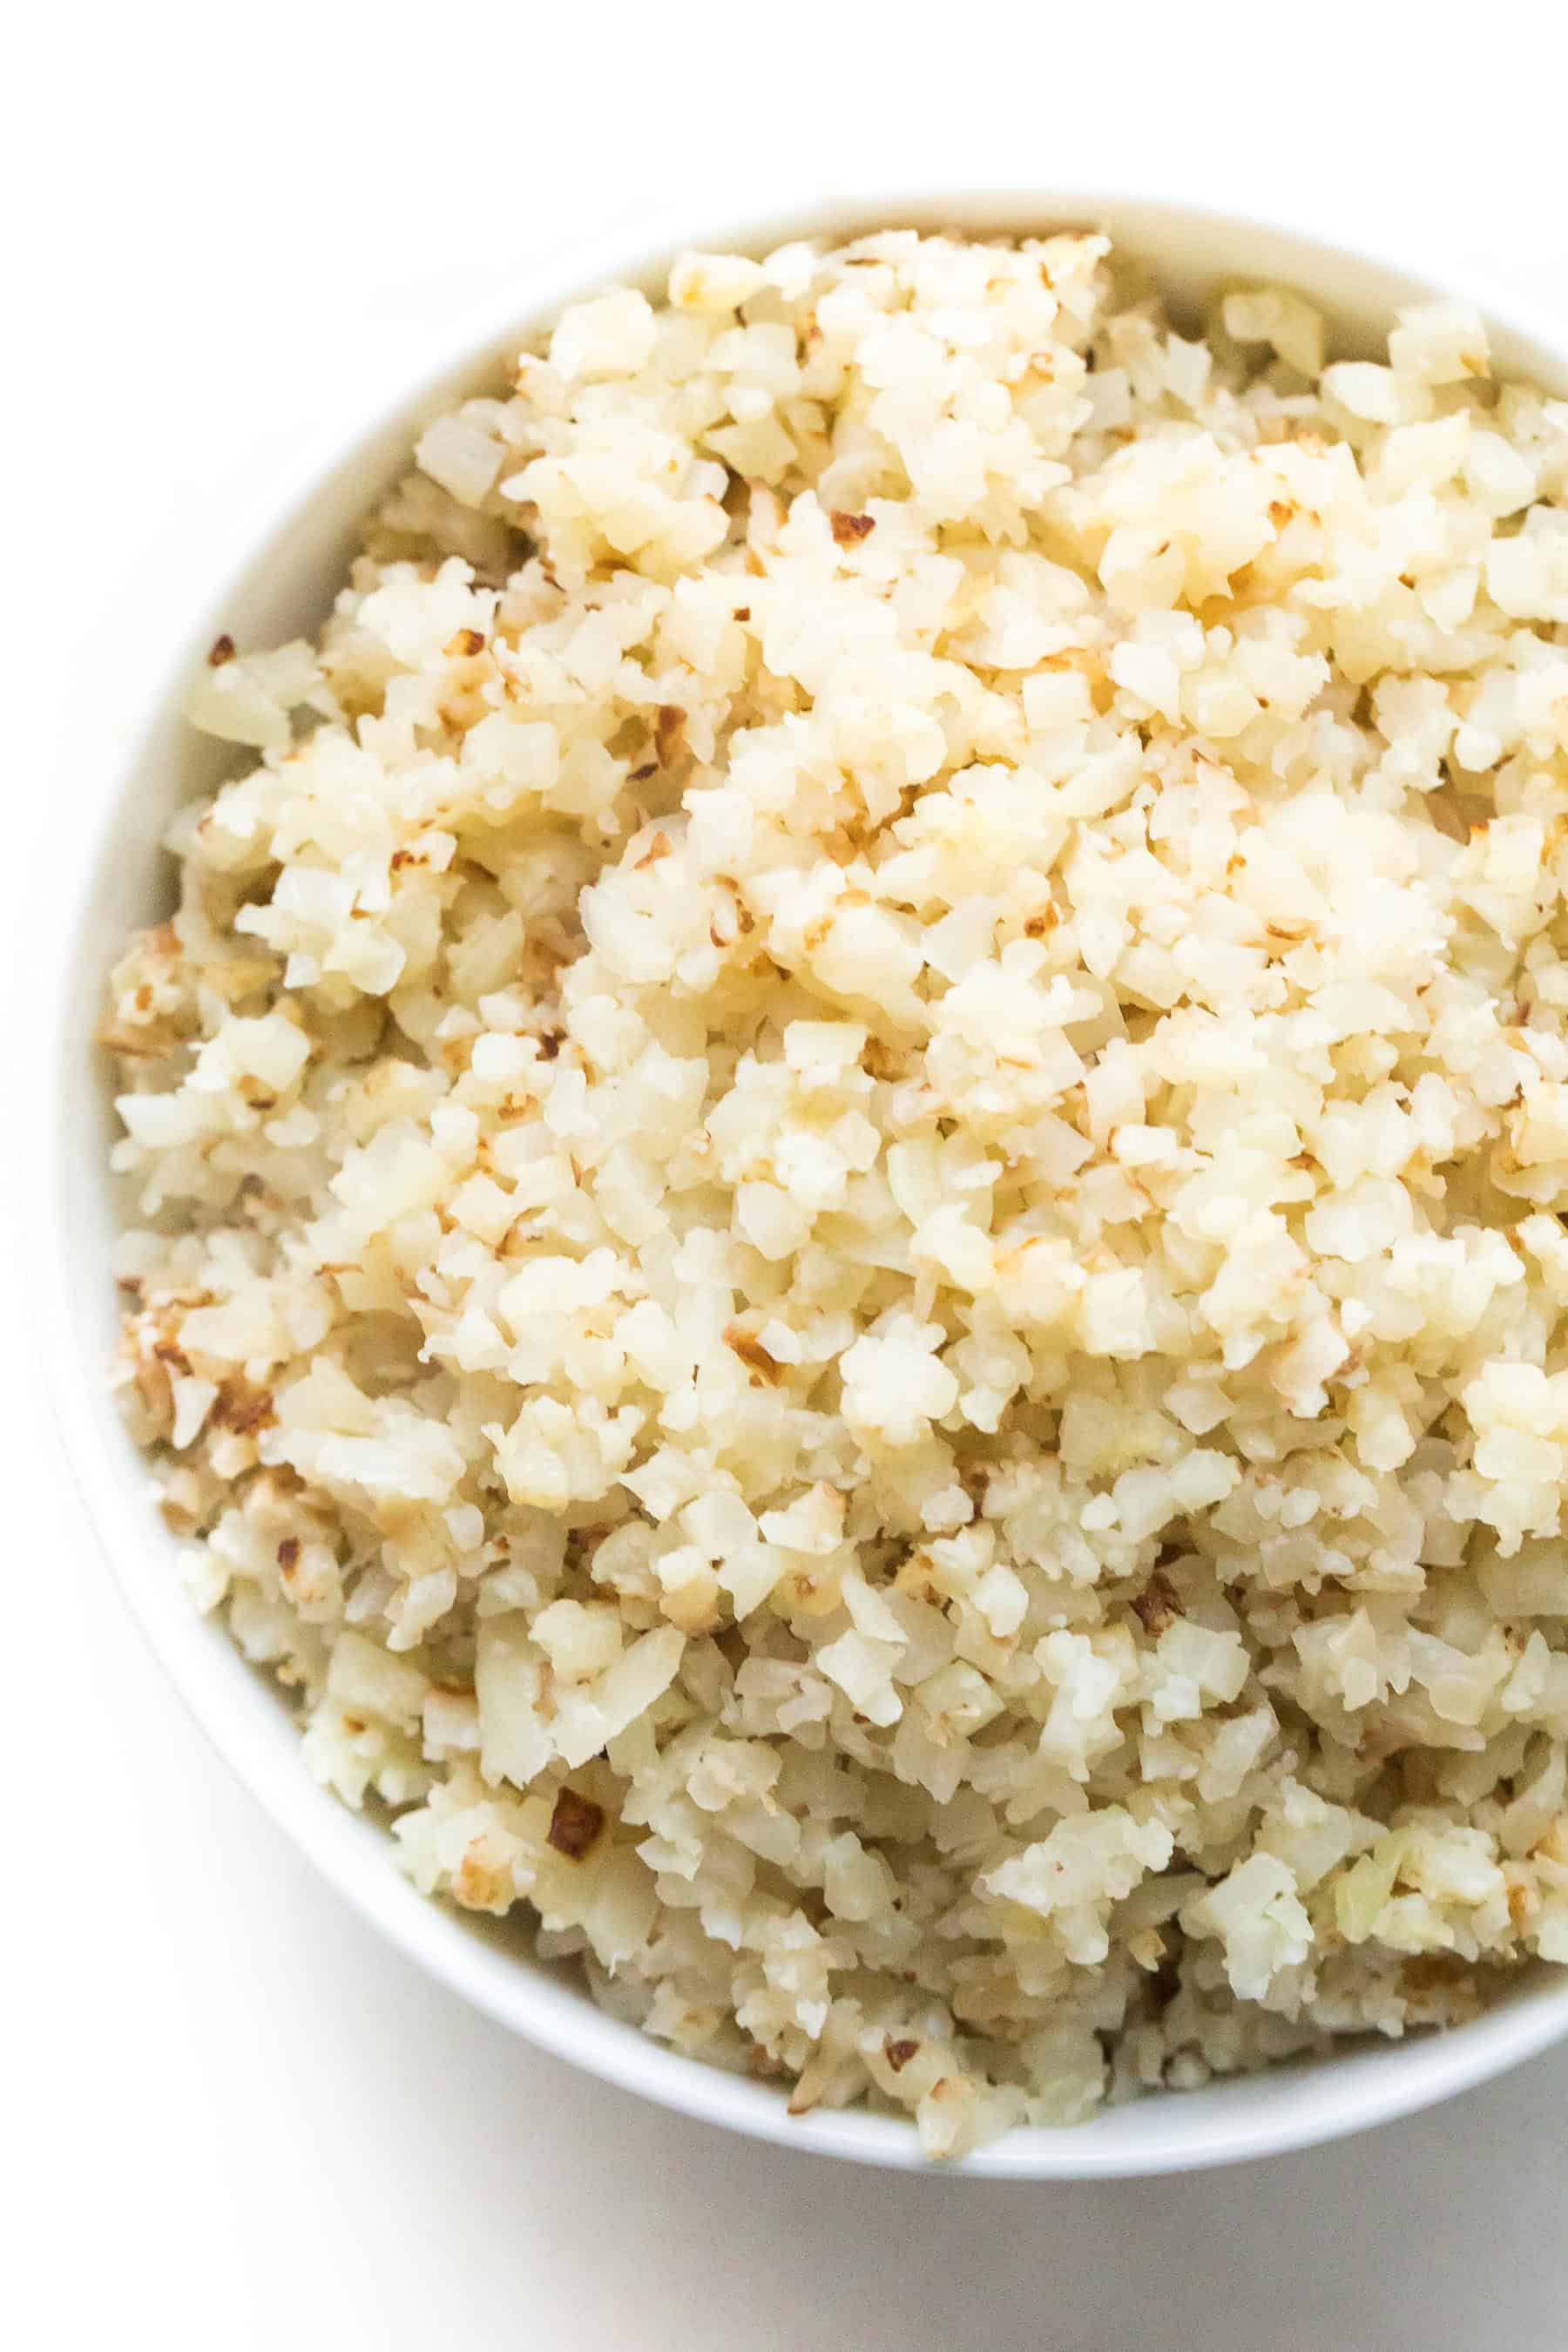 cauliflower rice after cooking it from frozen in a white bowl with a white background